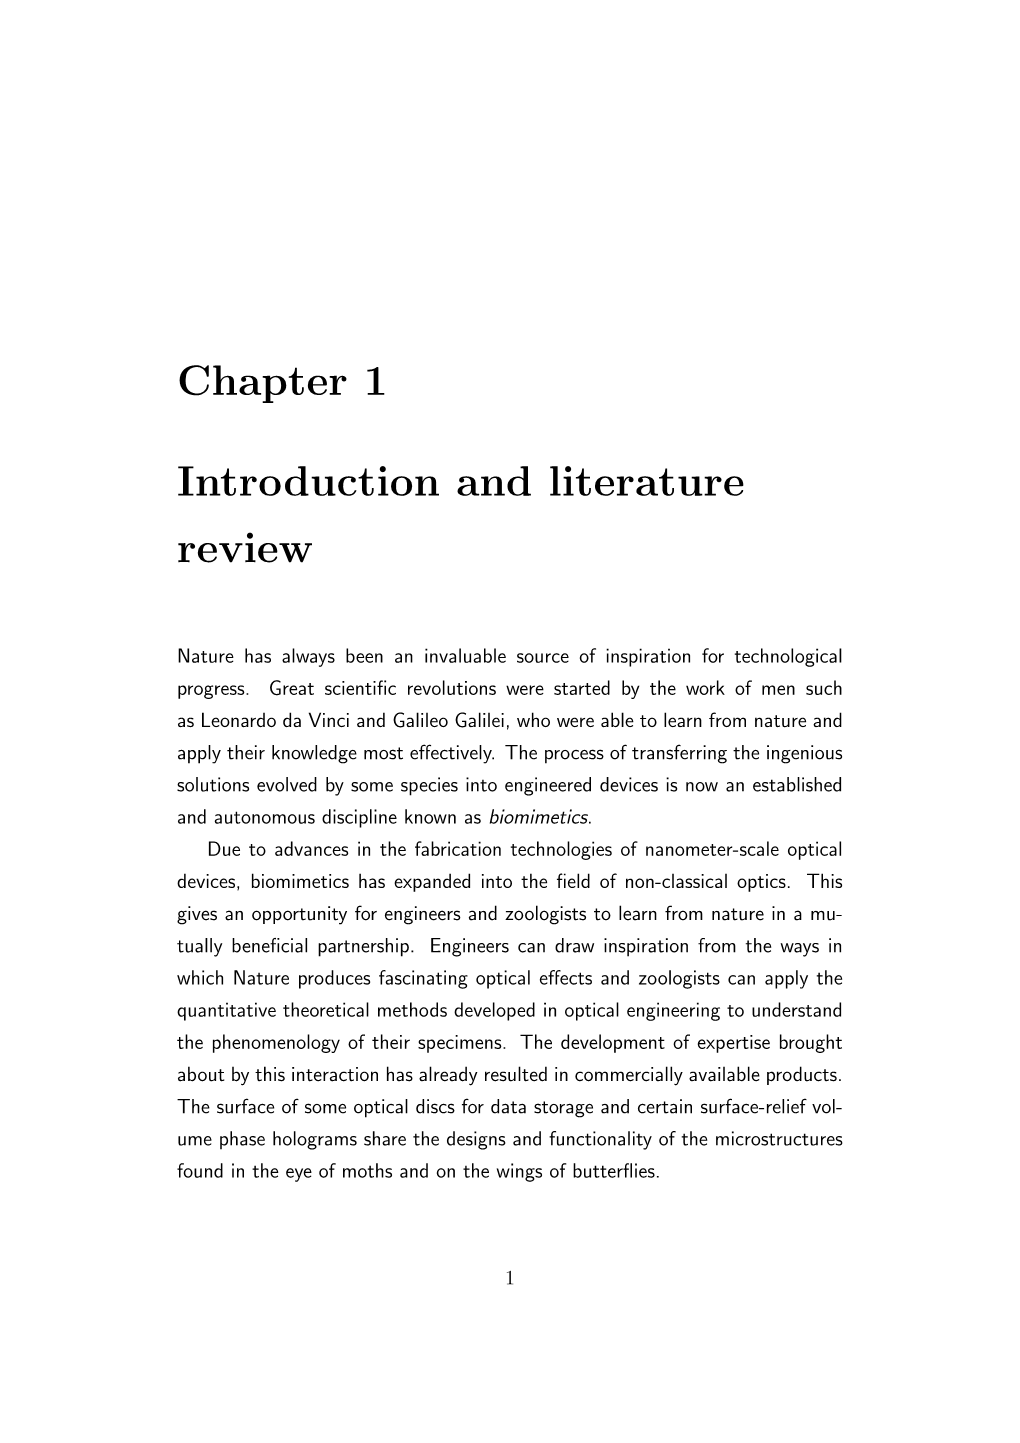 Chapter 1 Introduction and Literature Review